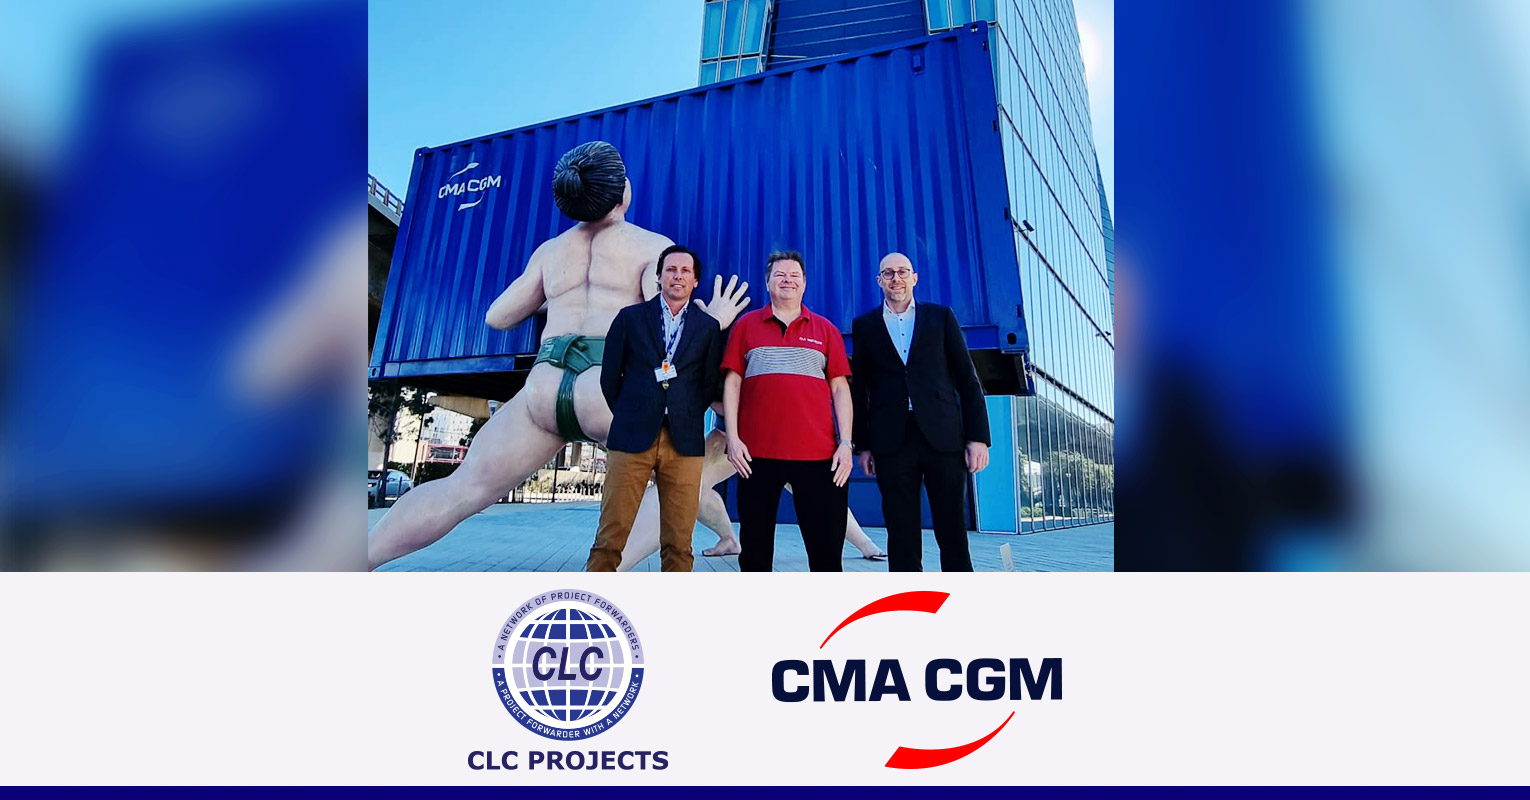 CLC Projects met with Julian Kurz and William Stalin of CMA CGM at their head office in Marseille, France